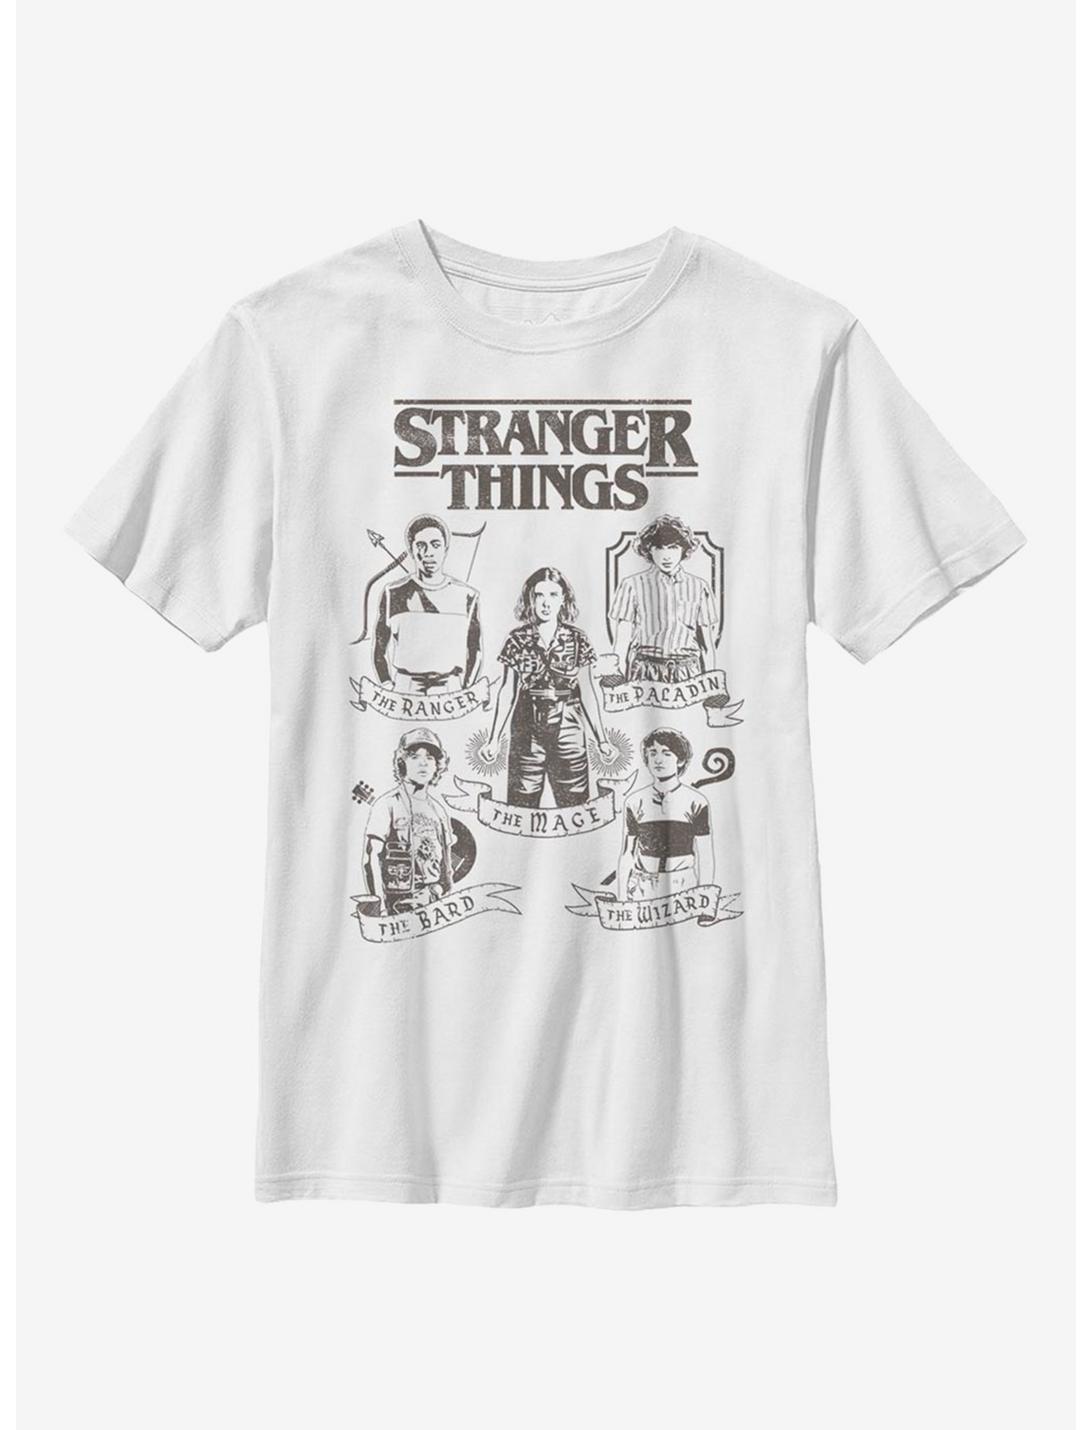 Stranger Things DND Classes Youth T-Shirt, WHITE, hi-res